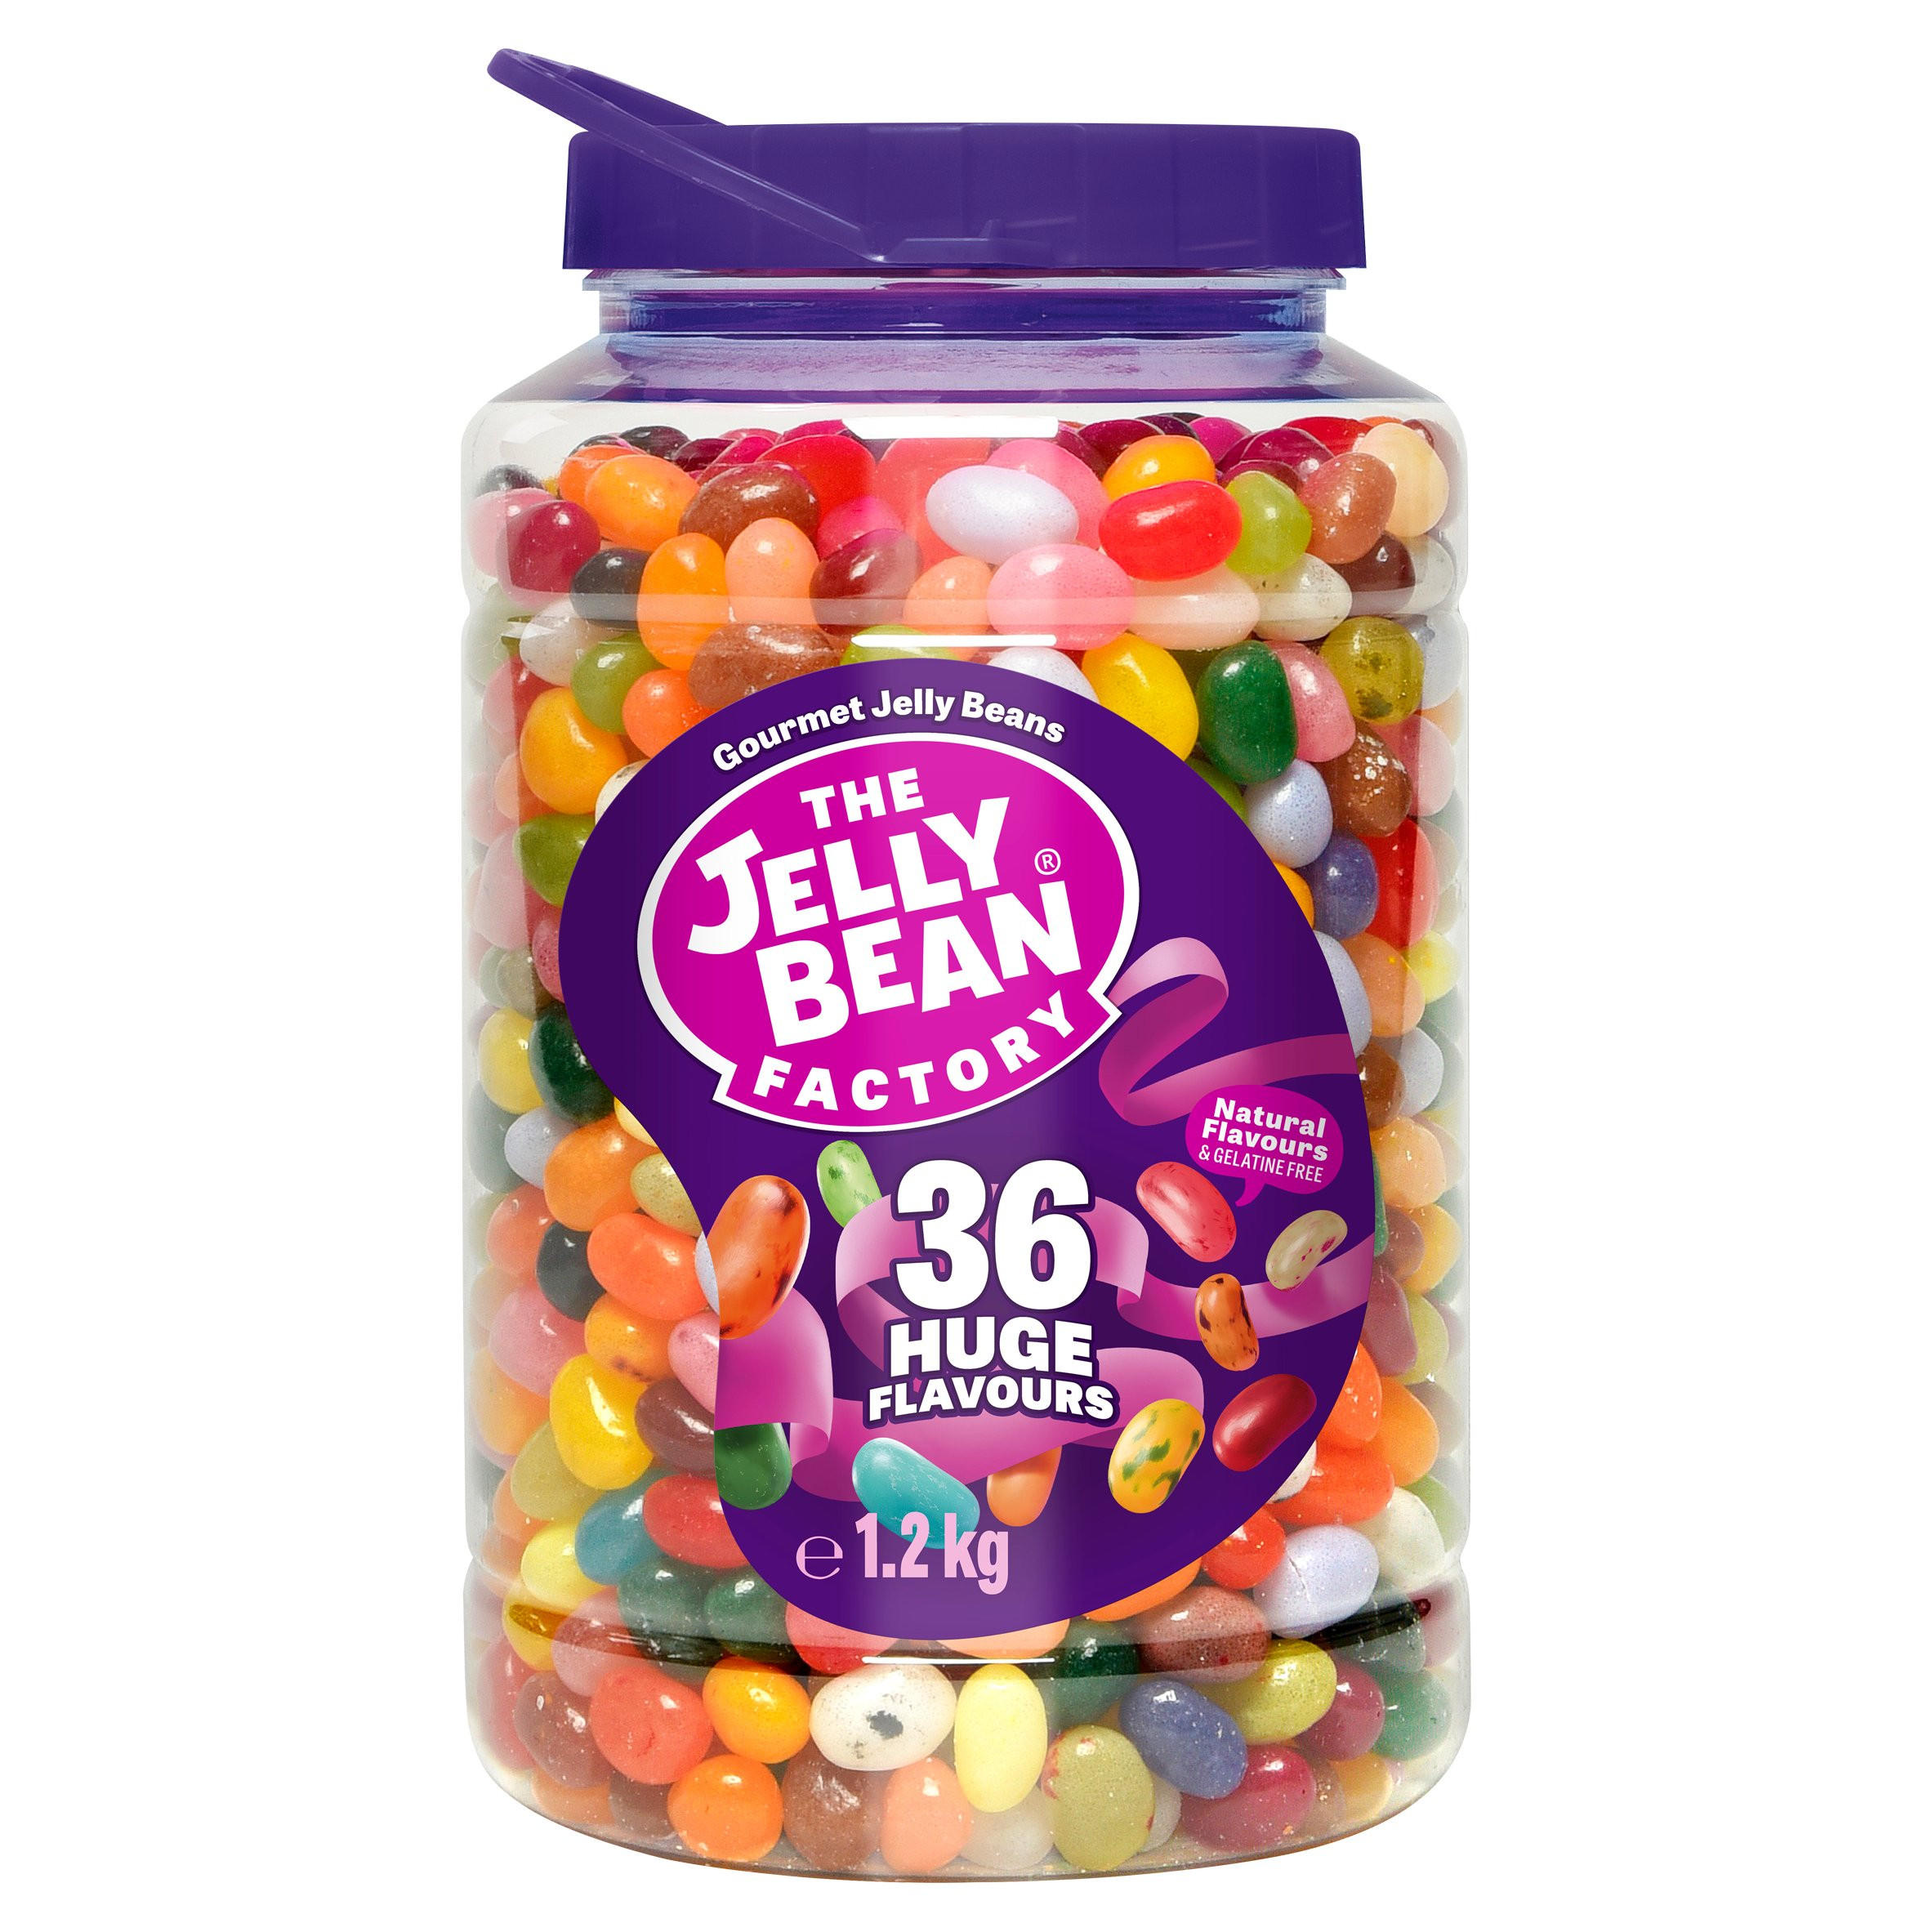 Jellybean brains. The Jelly belly Factory. The Jelly Bean 36 вкусов 70 гр. Jelly Bean brainss. Jelly Bean Brains фото.